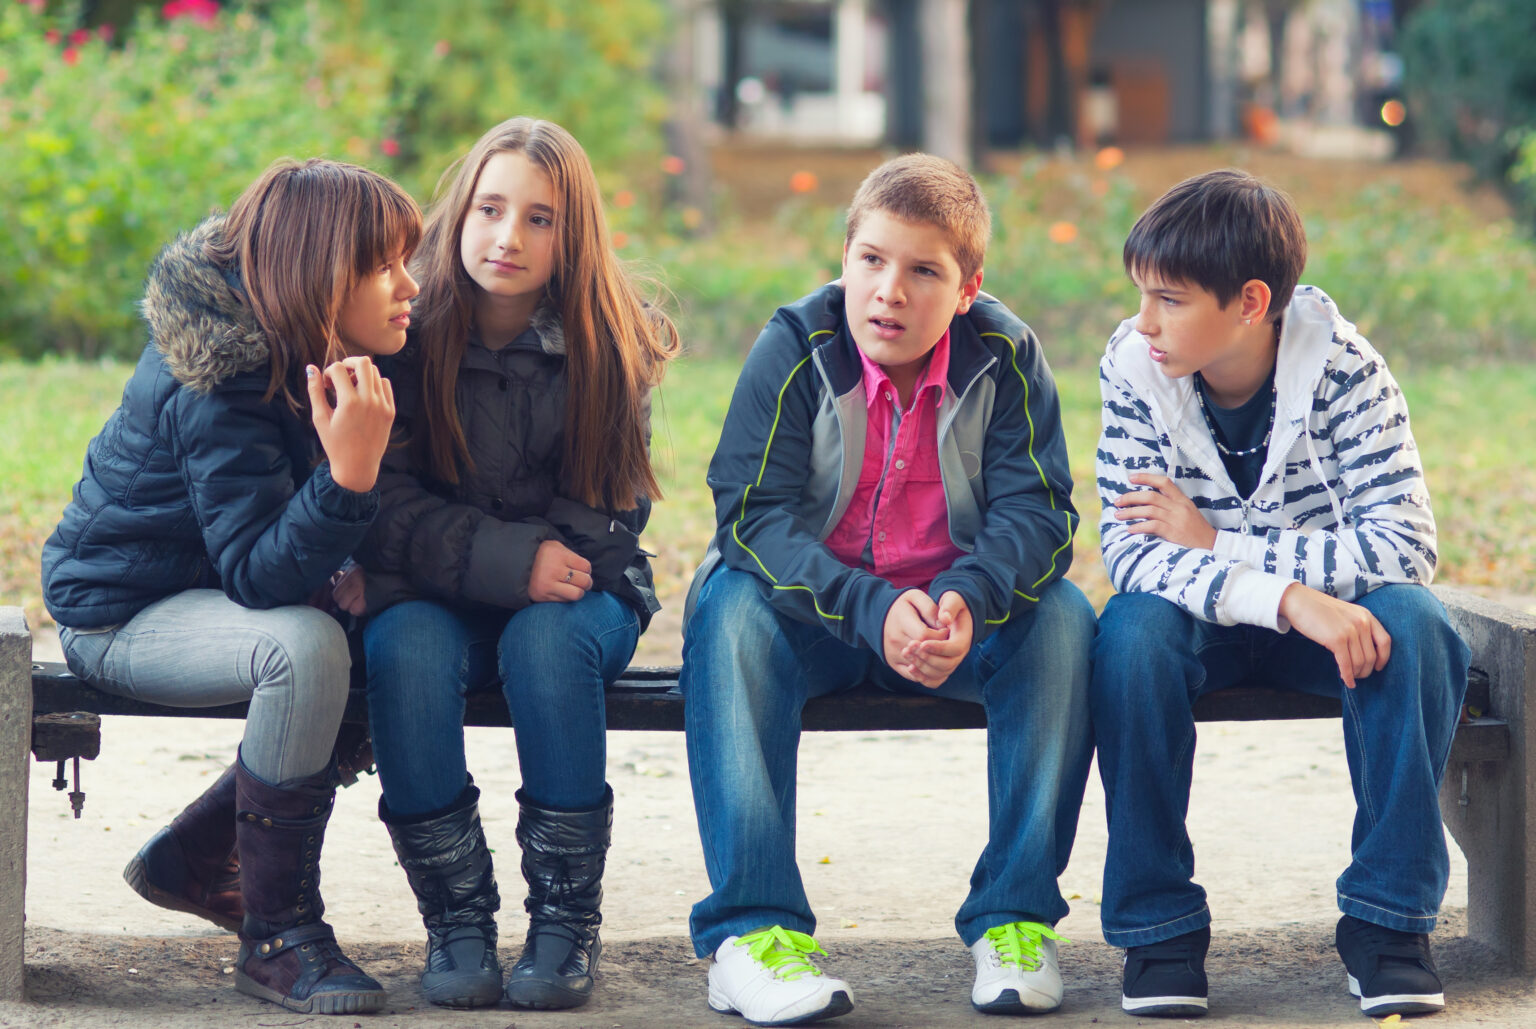 A group of young people sitting on a bench talking